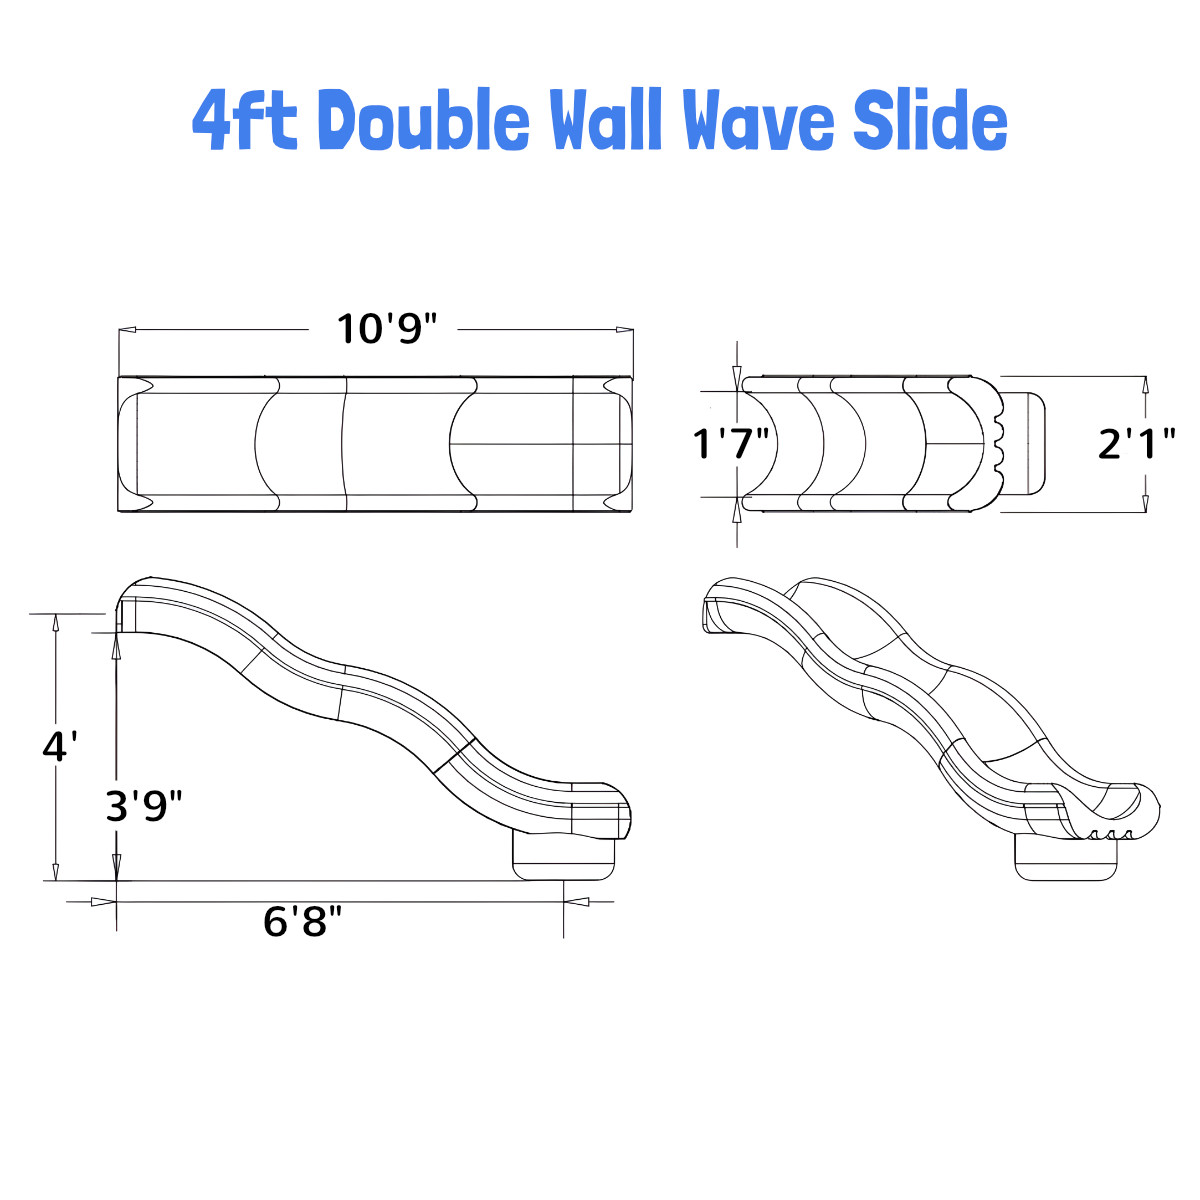 4 ft Commercial Double Wall Wave Slide